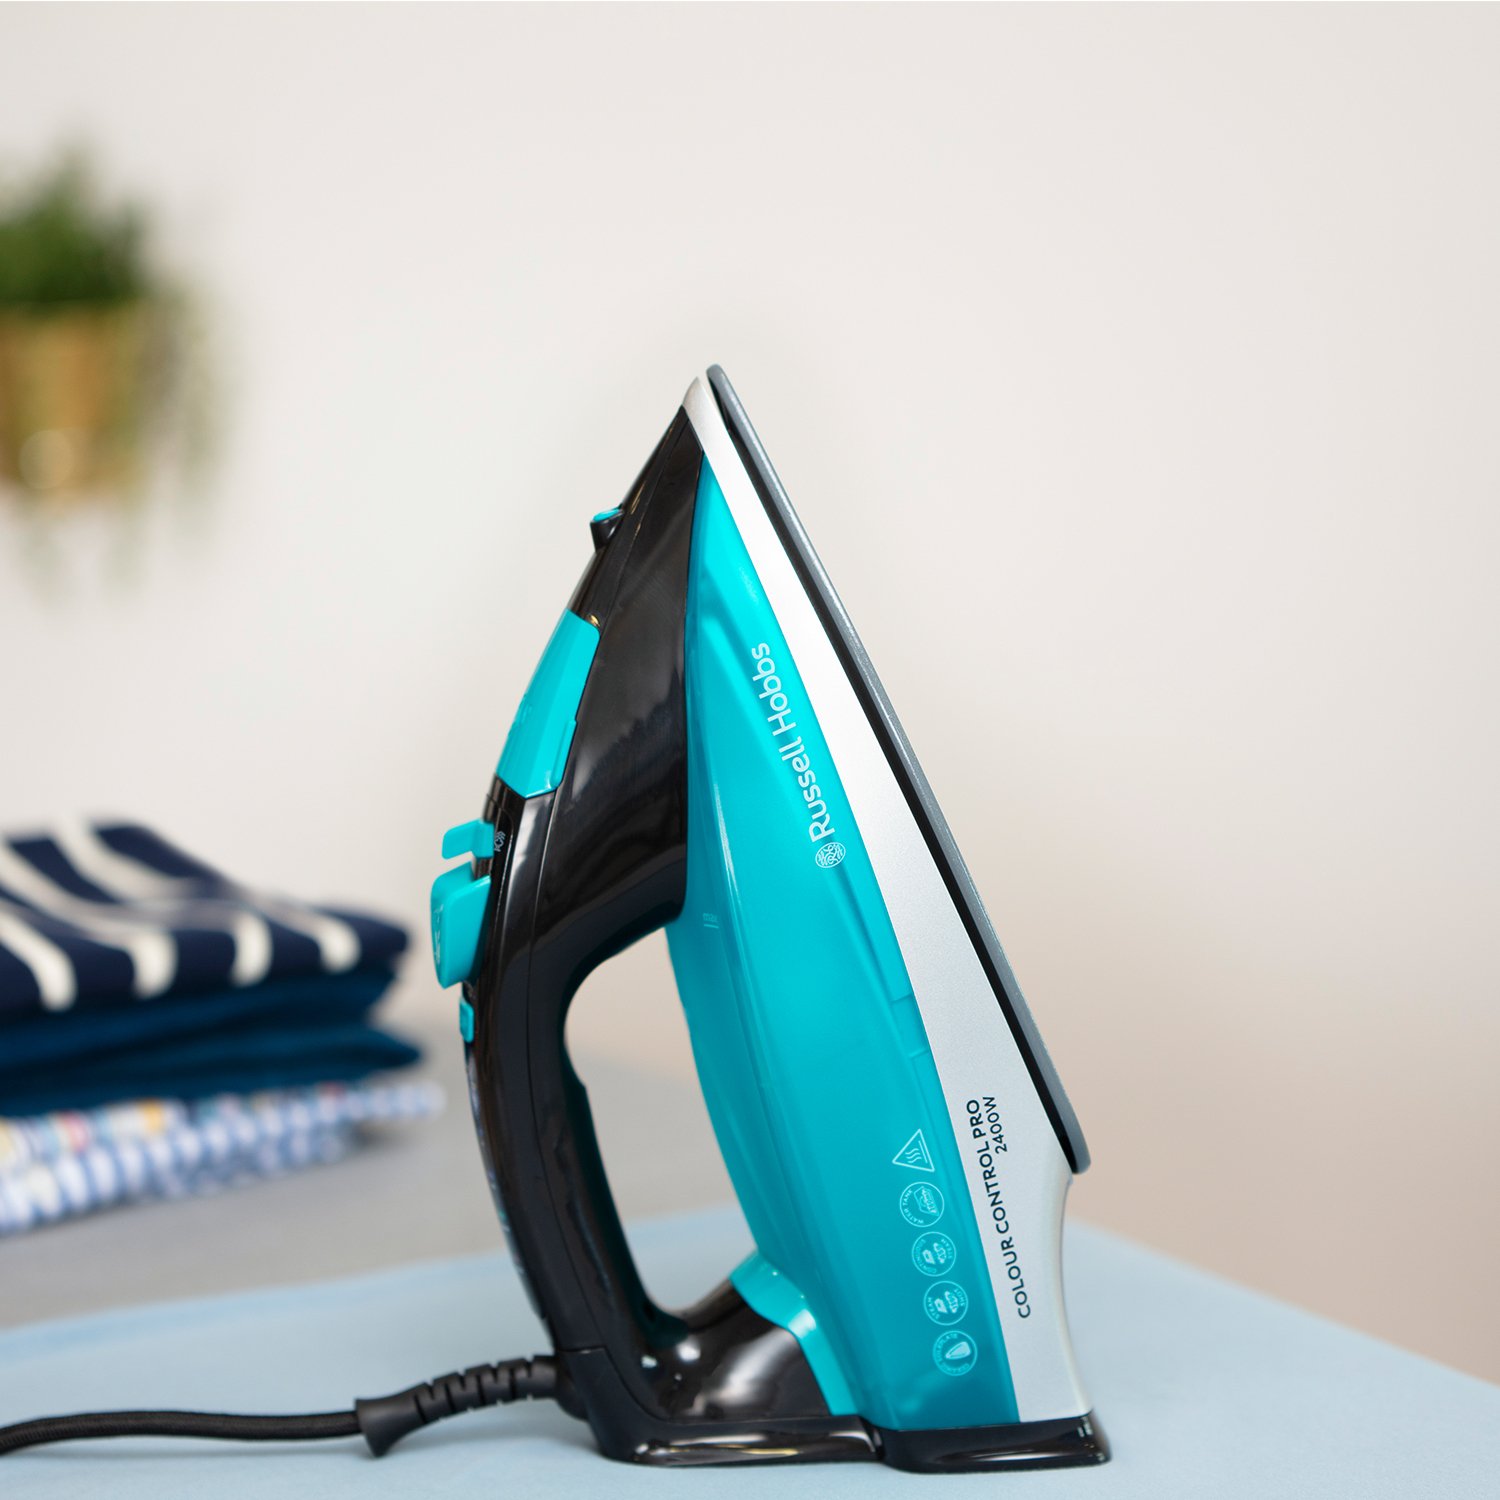 Russell Hobbs 22860 Colour Control Steam Iron Review